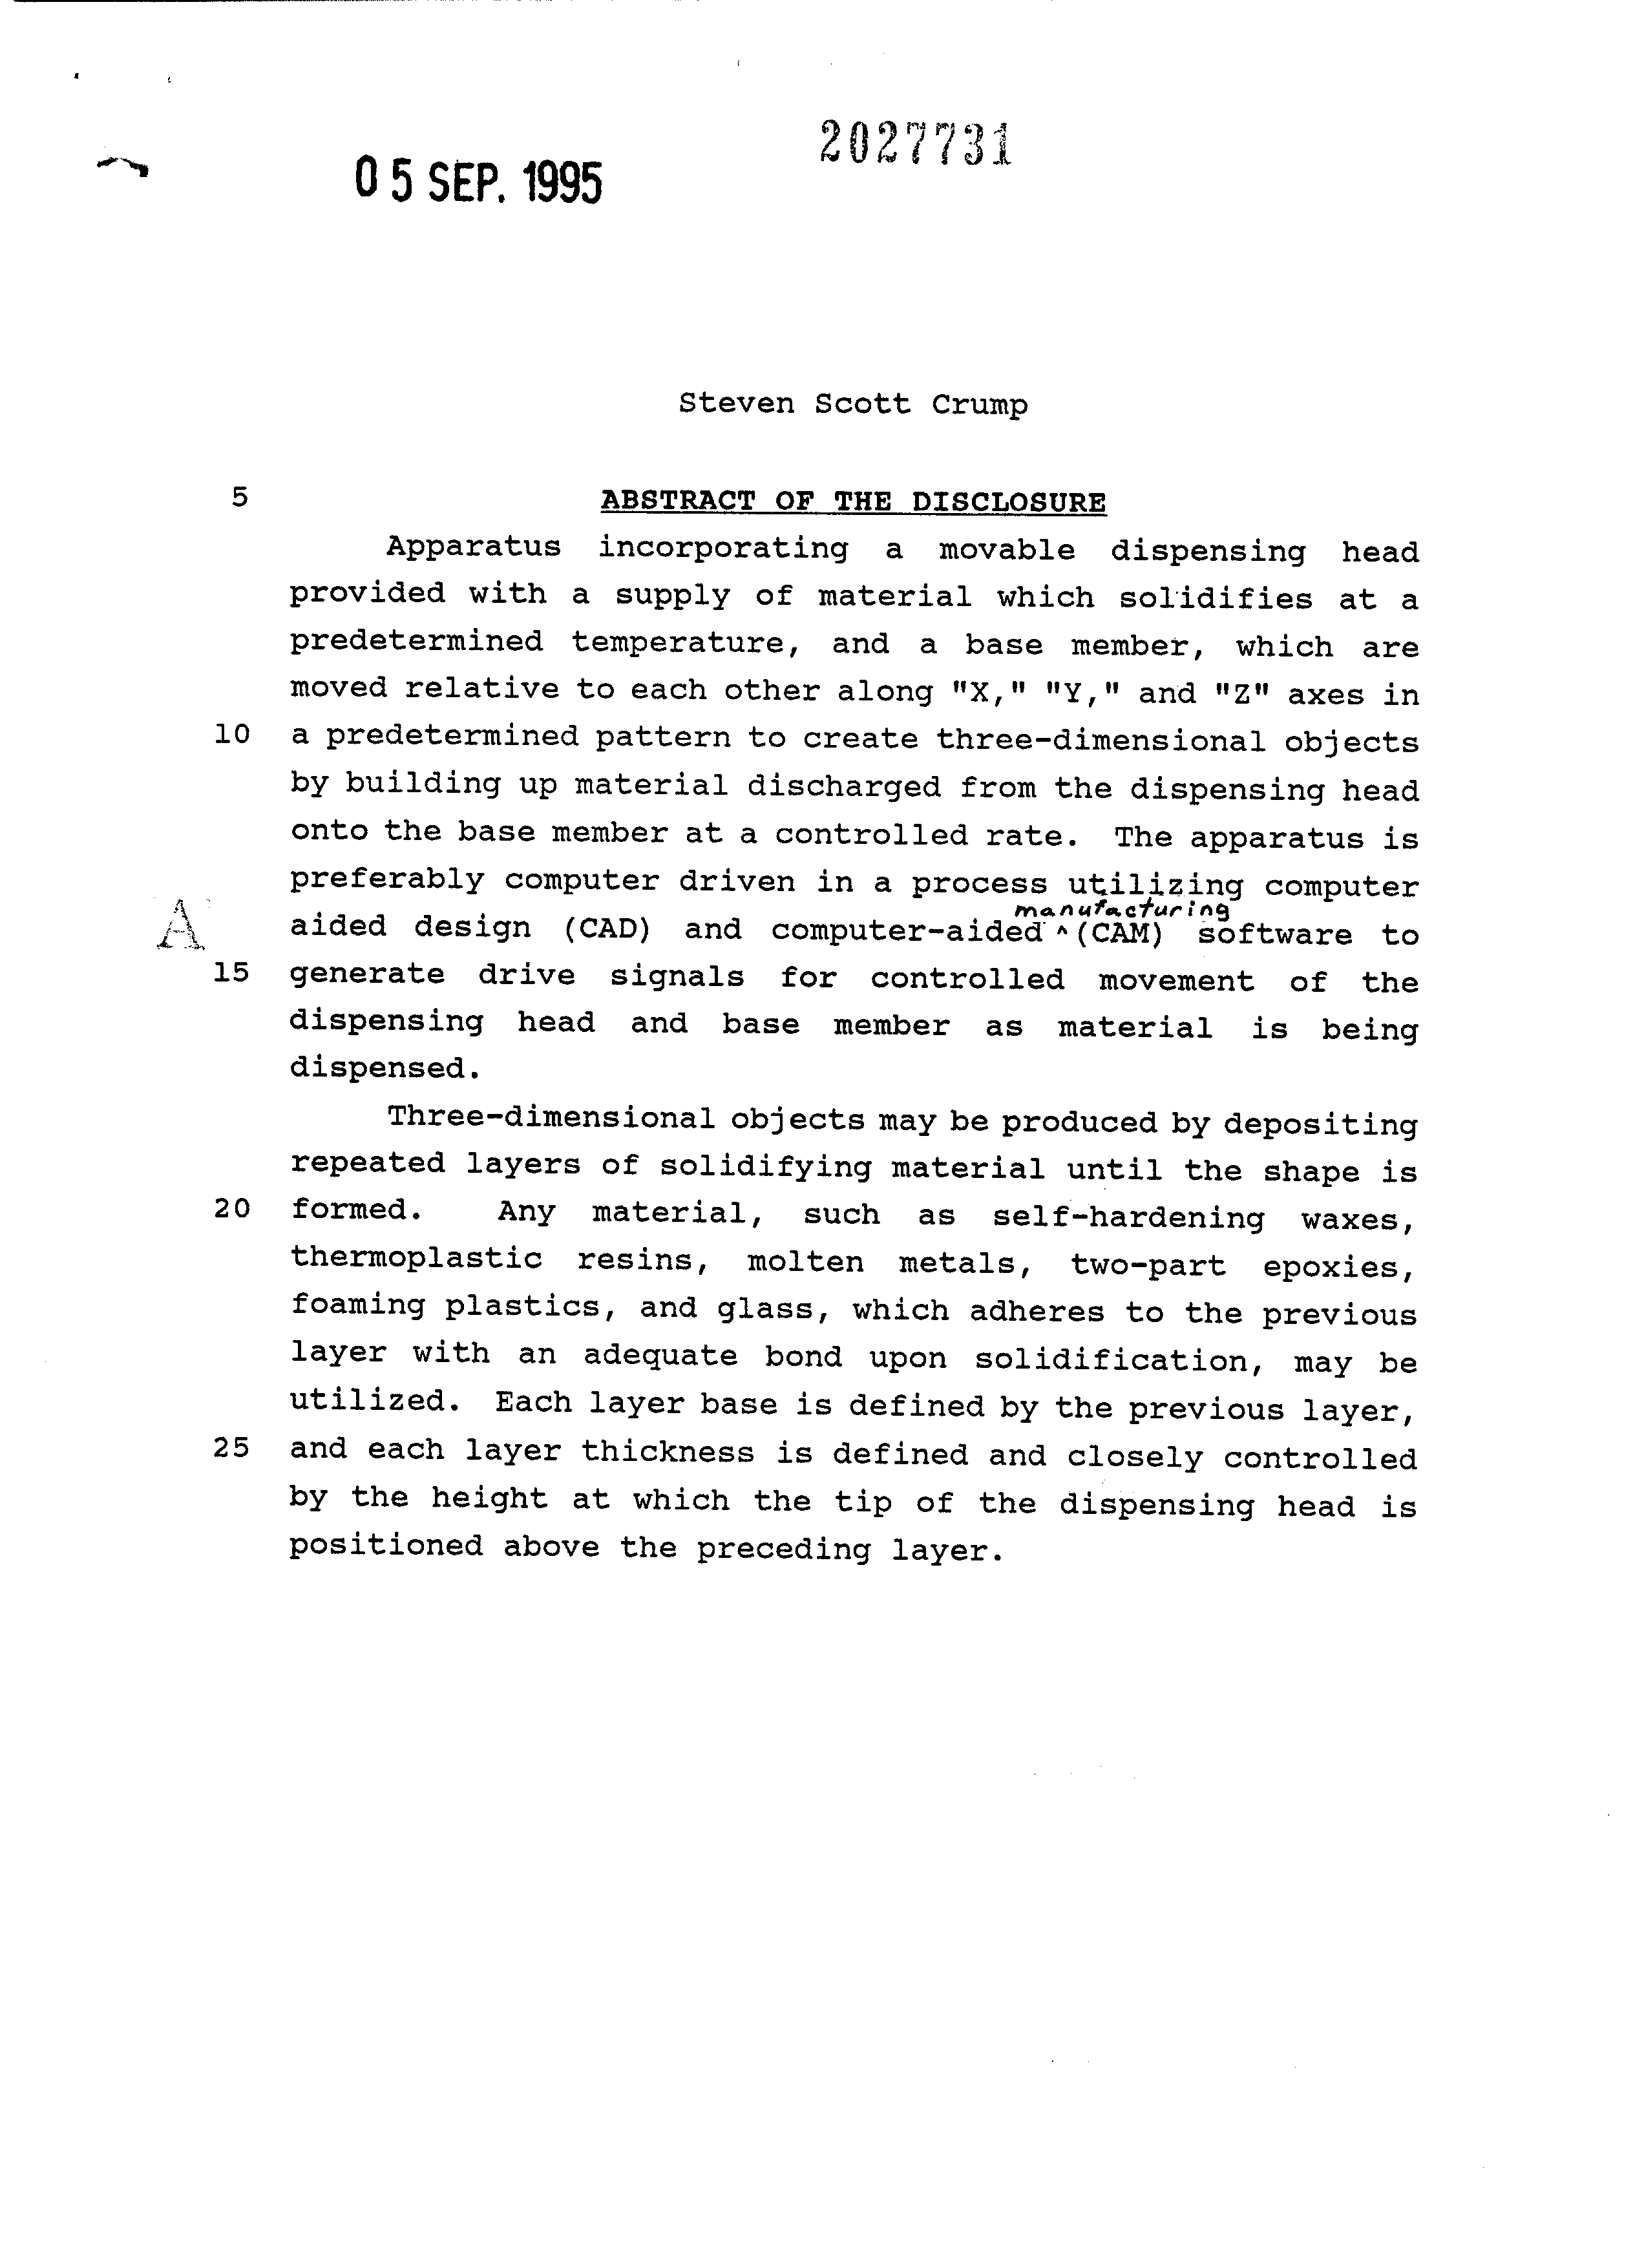 Canadian Patent Document 2027731. Abstract 19950905. Image 1 of 1